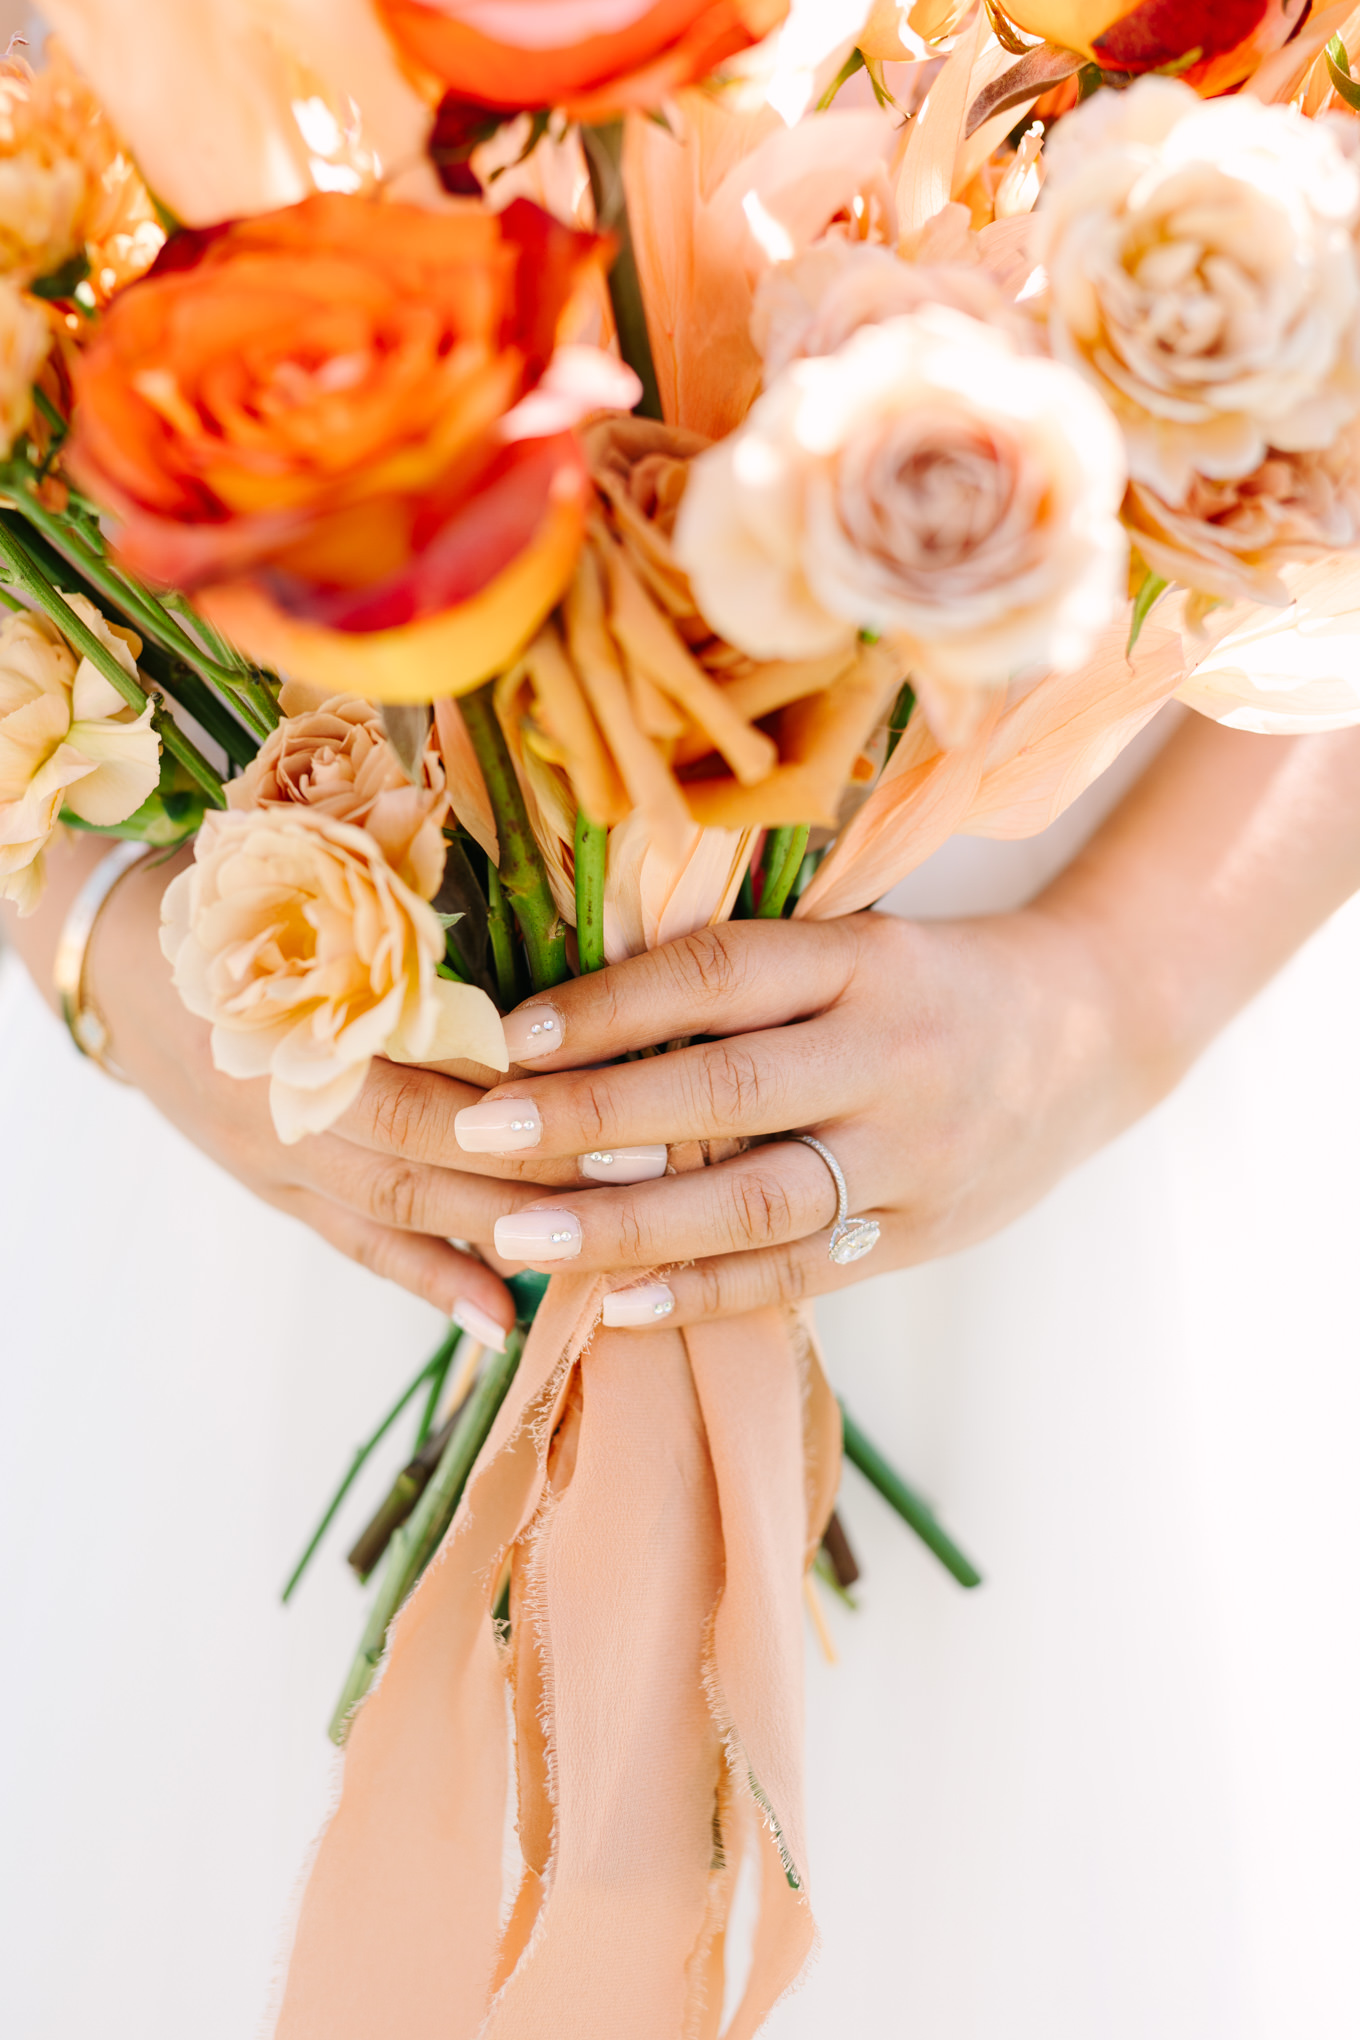 Wedding ring close up on bouquet | Pink and orange Lautner Compound wedding | Colorful Palm Springs wedding photography | #palmspringsphotographer #palmspringswedding #lautnercompound #southerncaliforniawedding  Source: Mary Costa Photography | Los Angeles